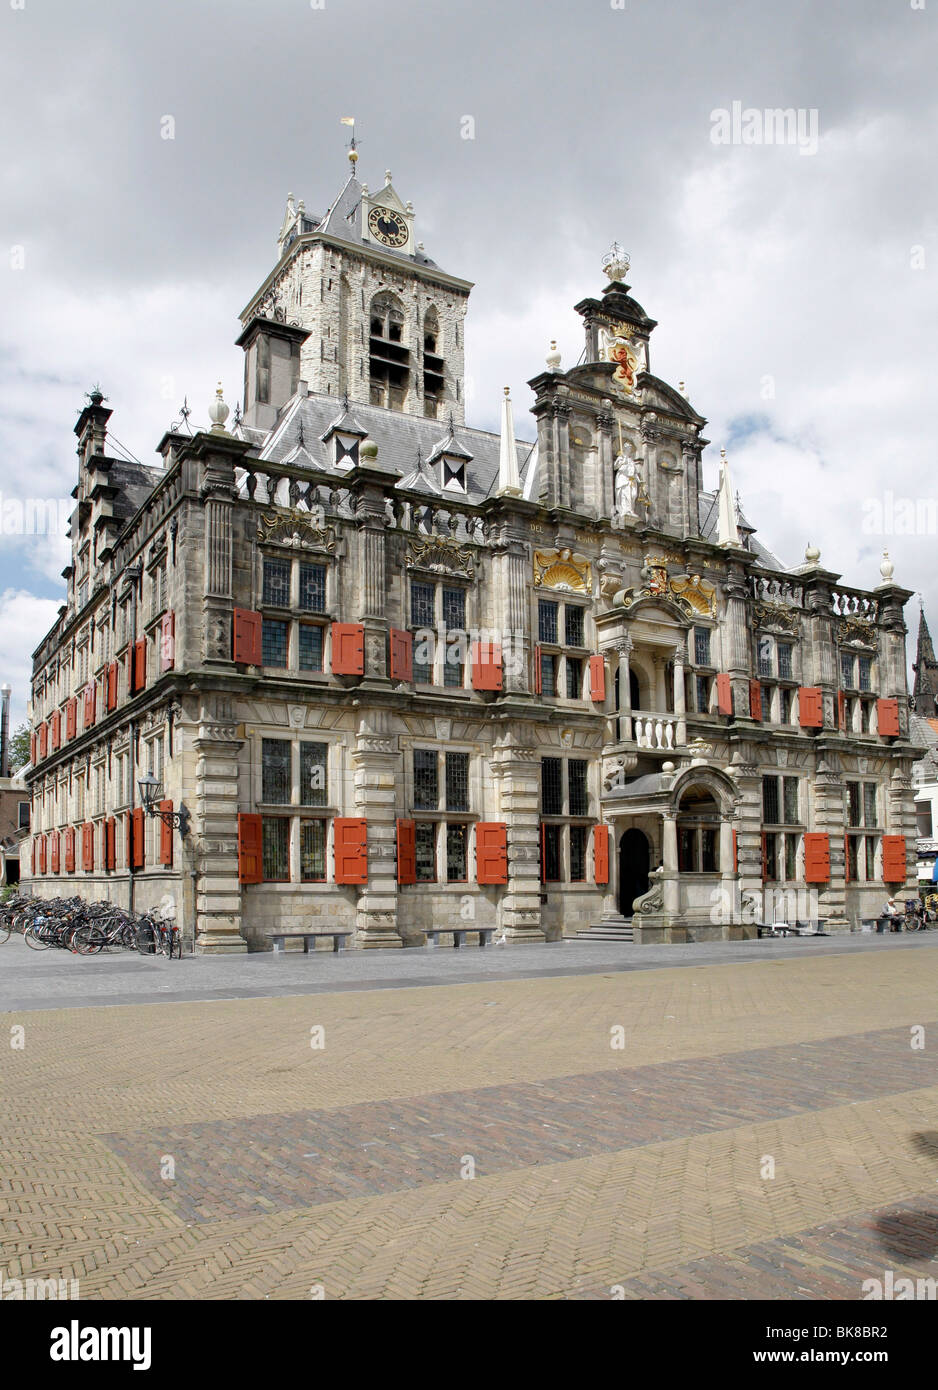 Stadhuis, city hall, Delft, The Netherlands, Europe Stock Photo